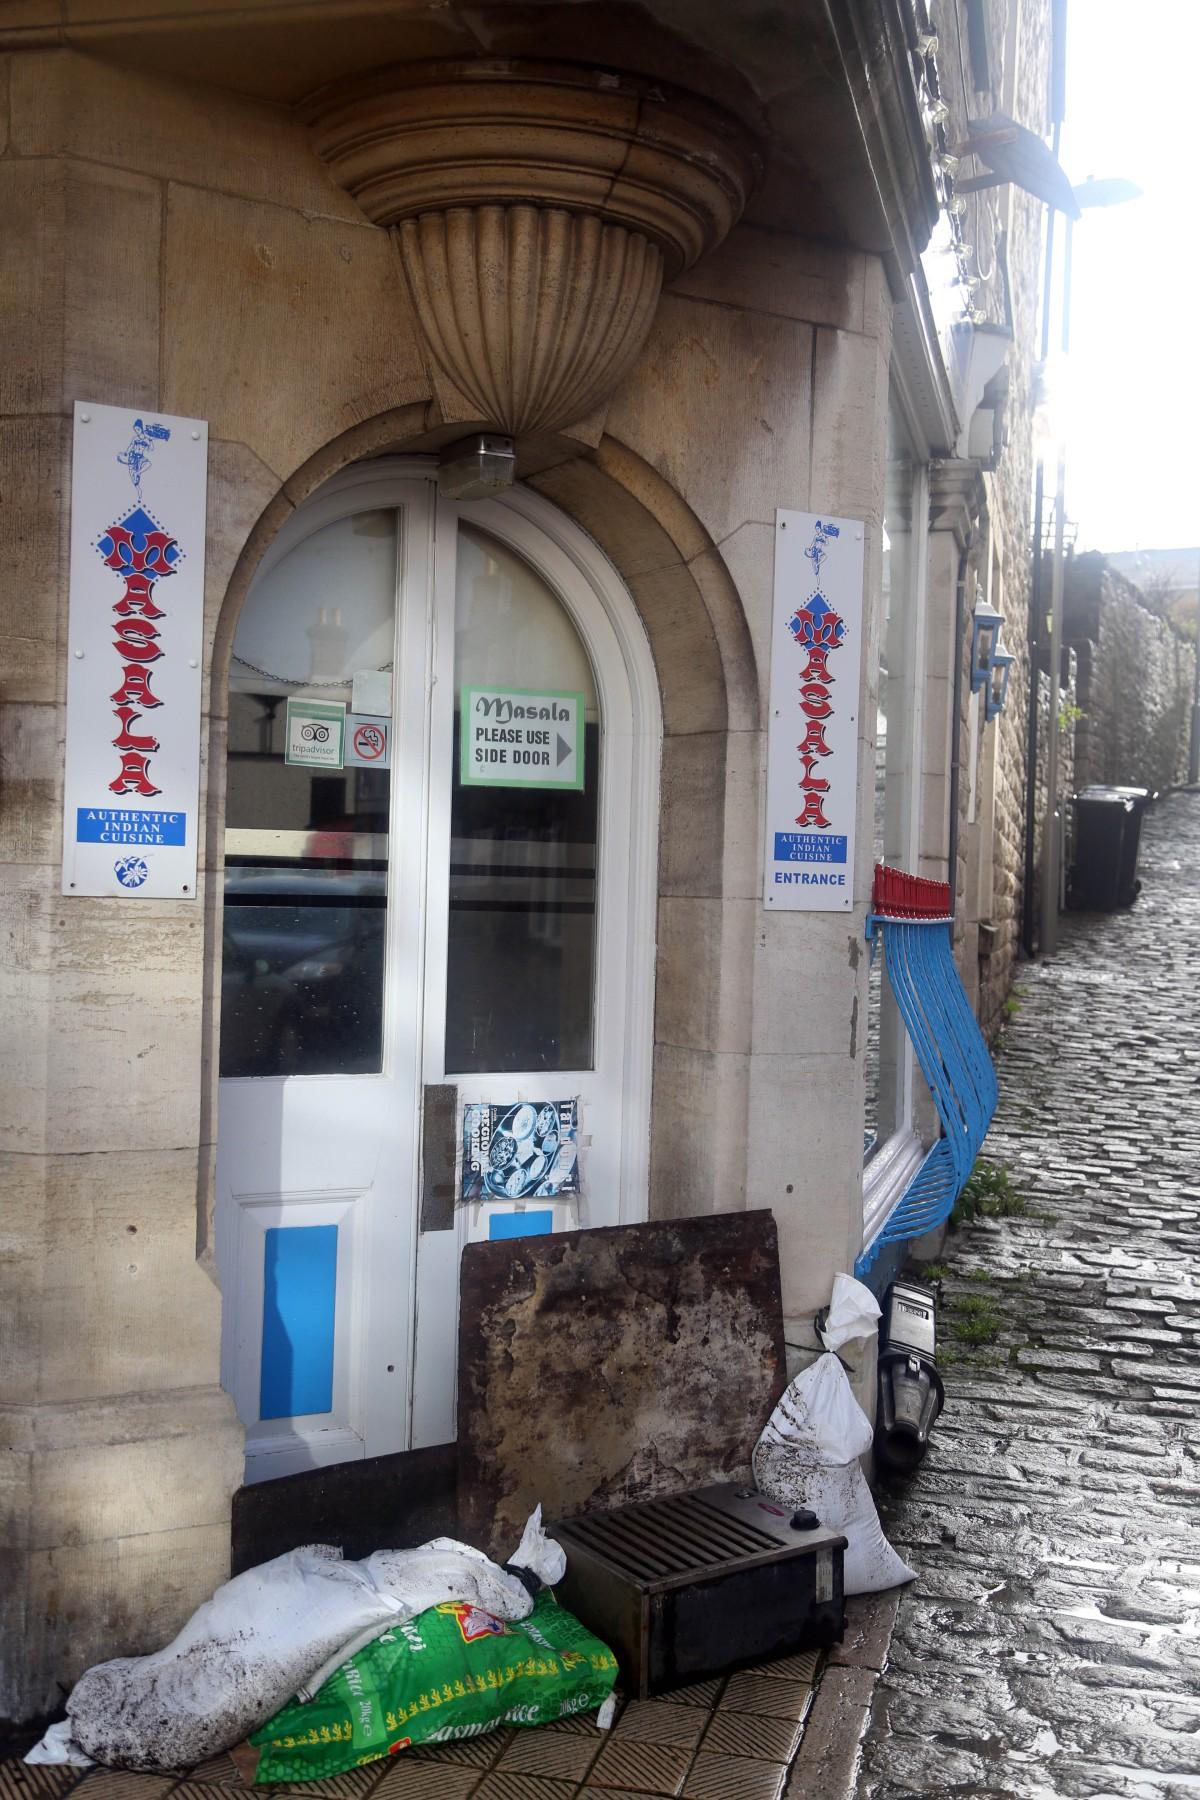 Swanage coastline experiences large waves, leaving Shore road closed. Businesses near to the coastline prepare for high waters.